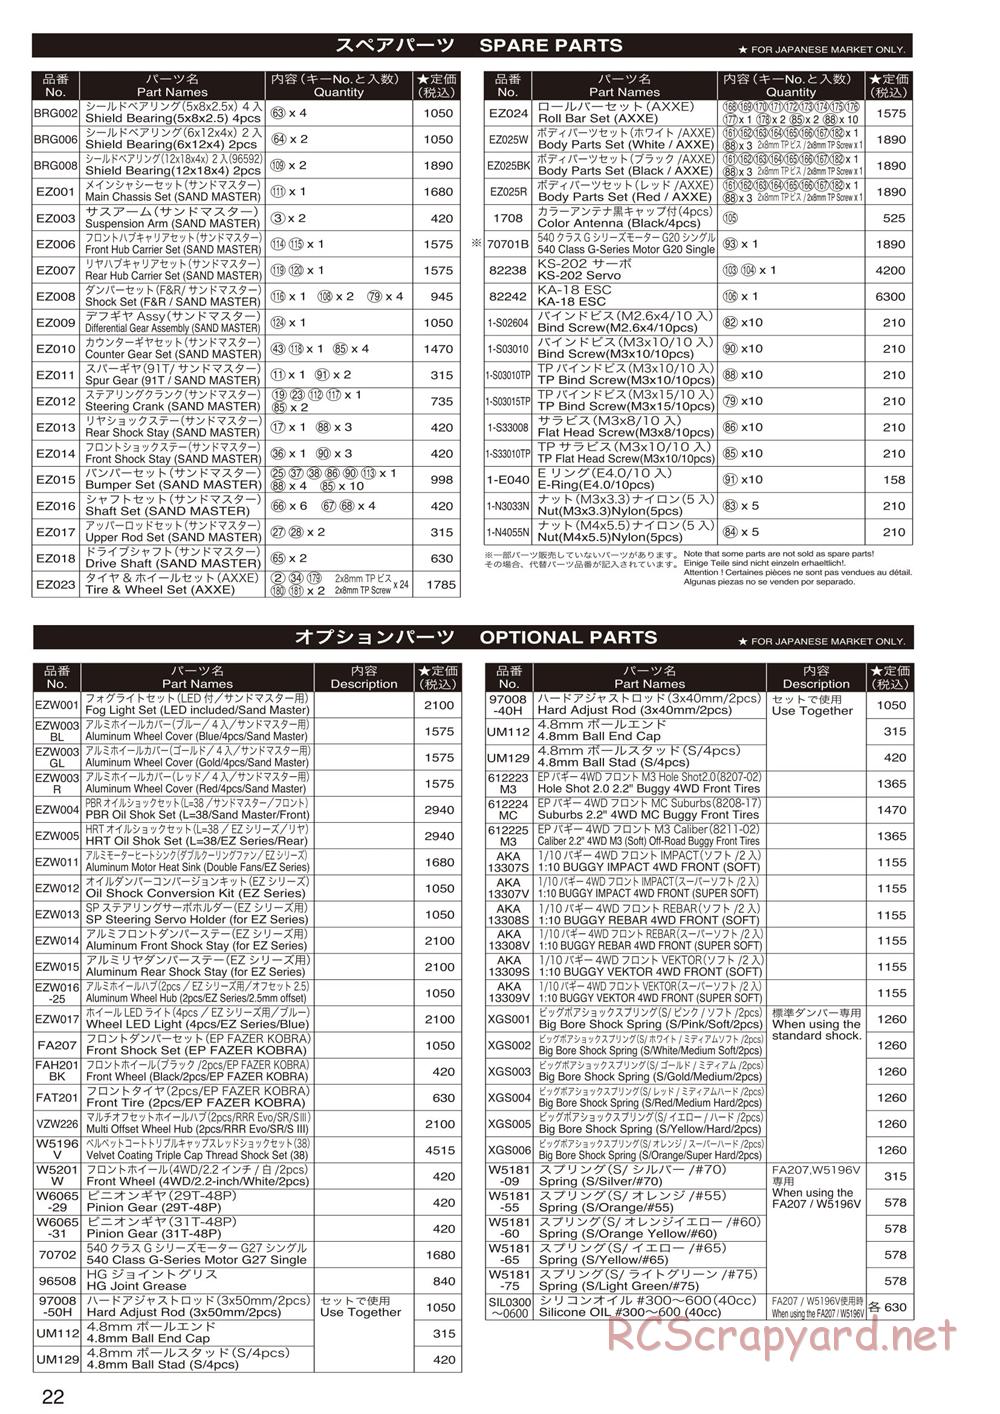 Kyosho - Axxe 2WD Desert Buggy - Parts List - Page 1